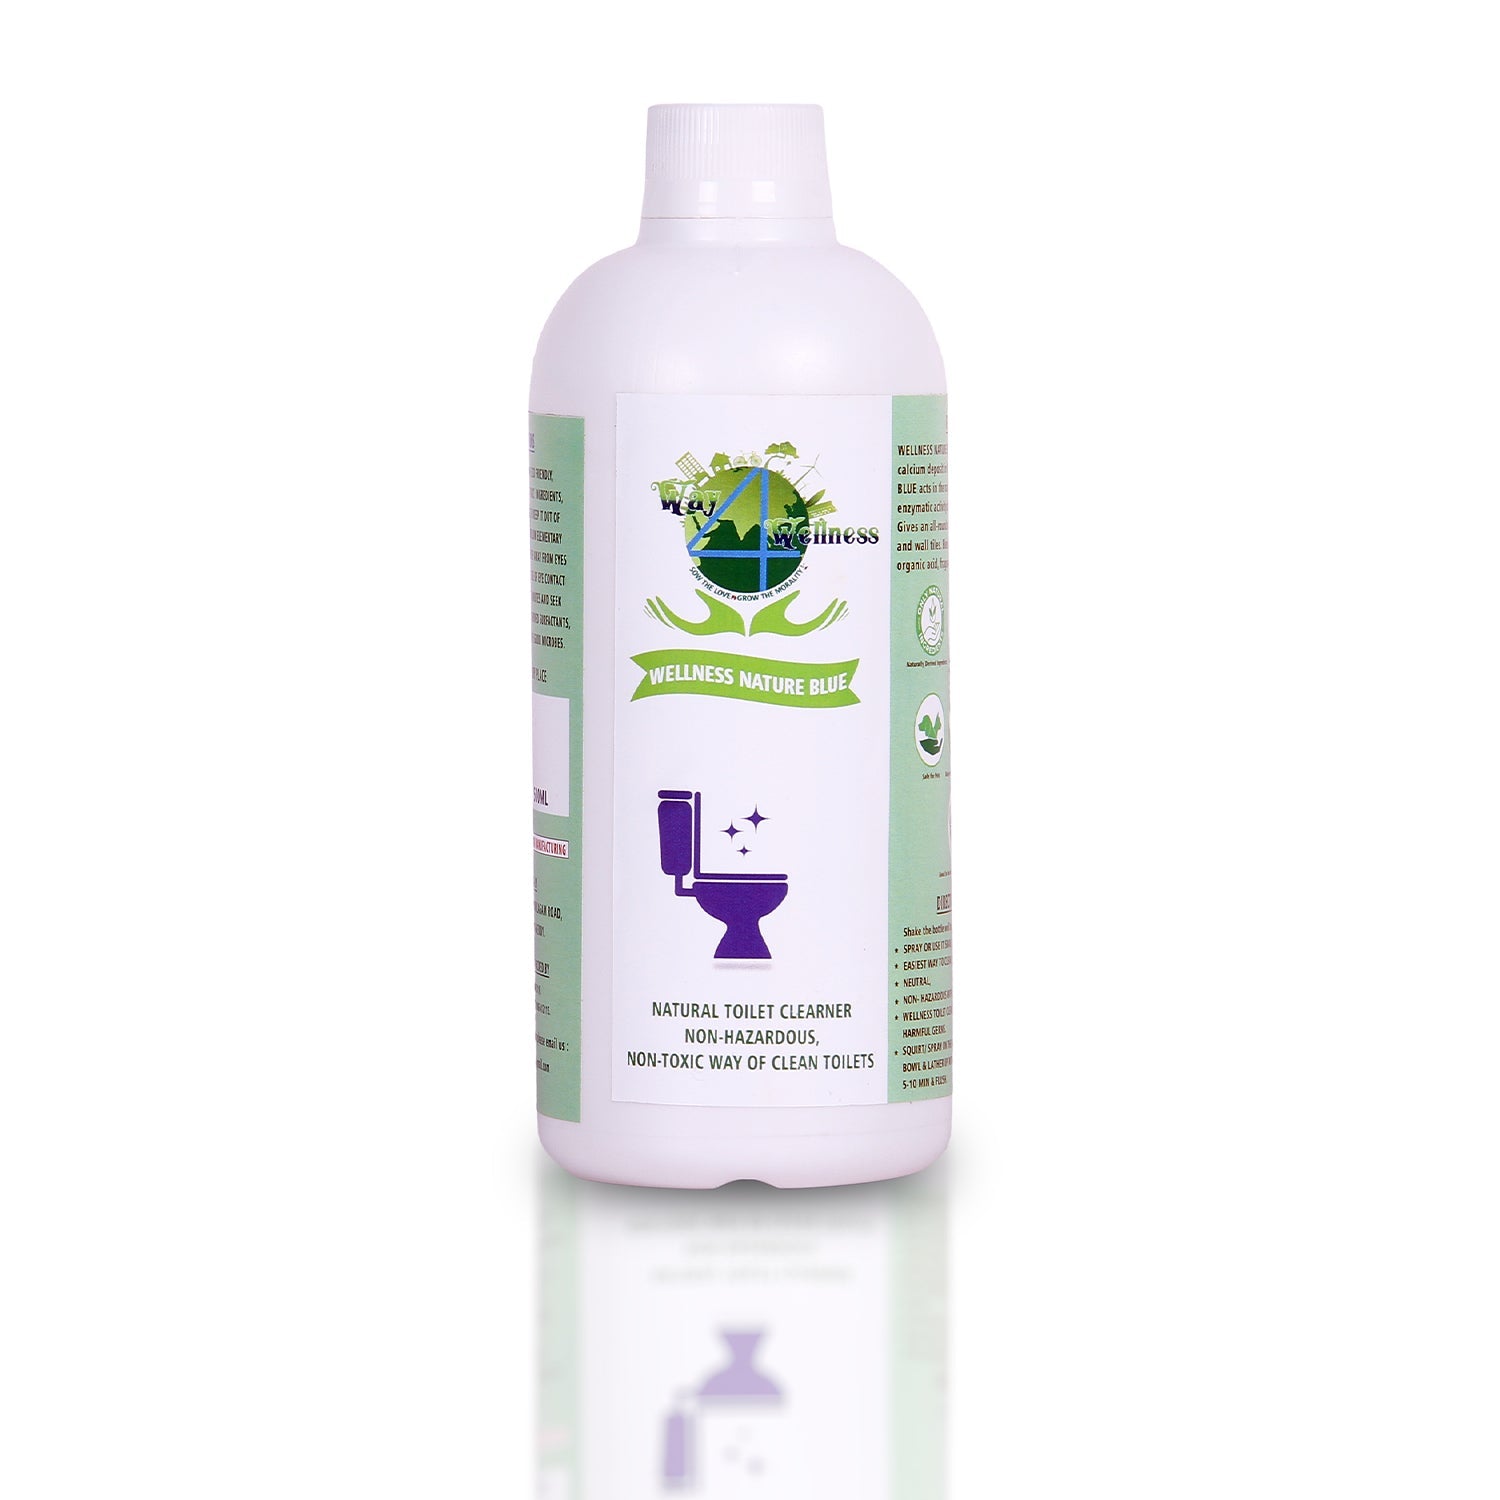 Wellness Natural Toilet Cleaner | Natural Liquid Disinfectant - 500ml | Plant Based, Non-hazardous, Non-toxic | Eliminates Tough Grime and Germs | No Bleach  - Pack of 2 -500ML each )